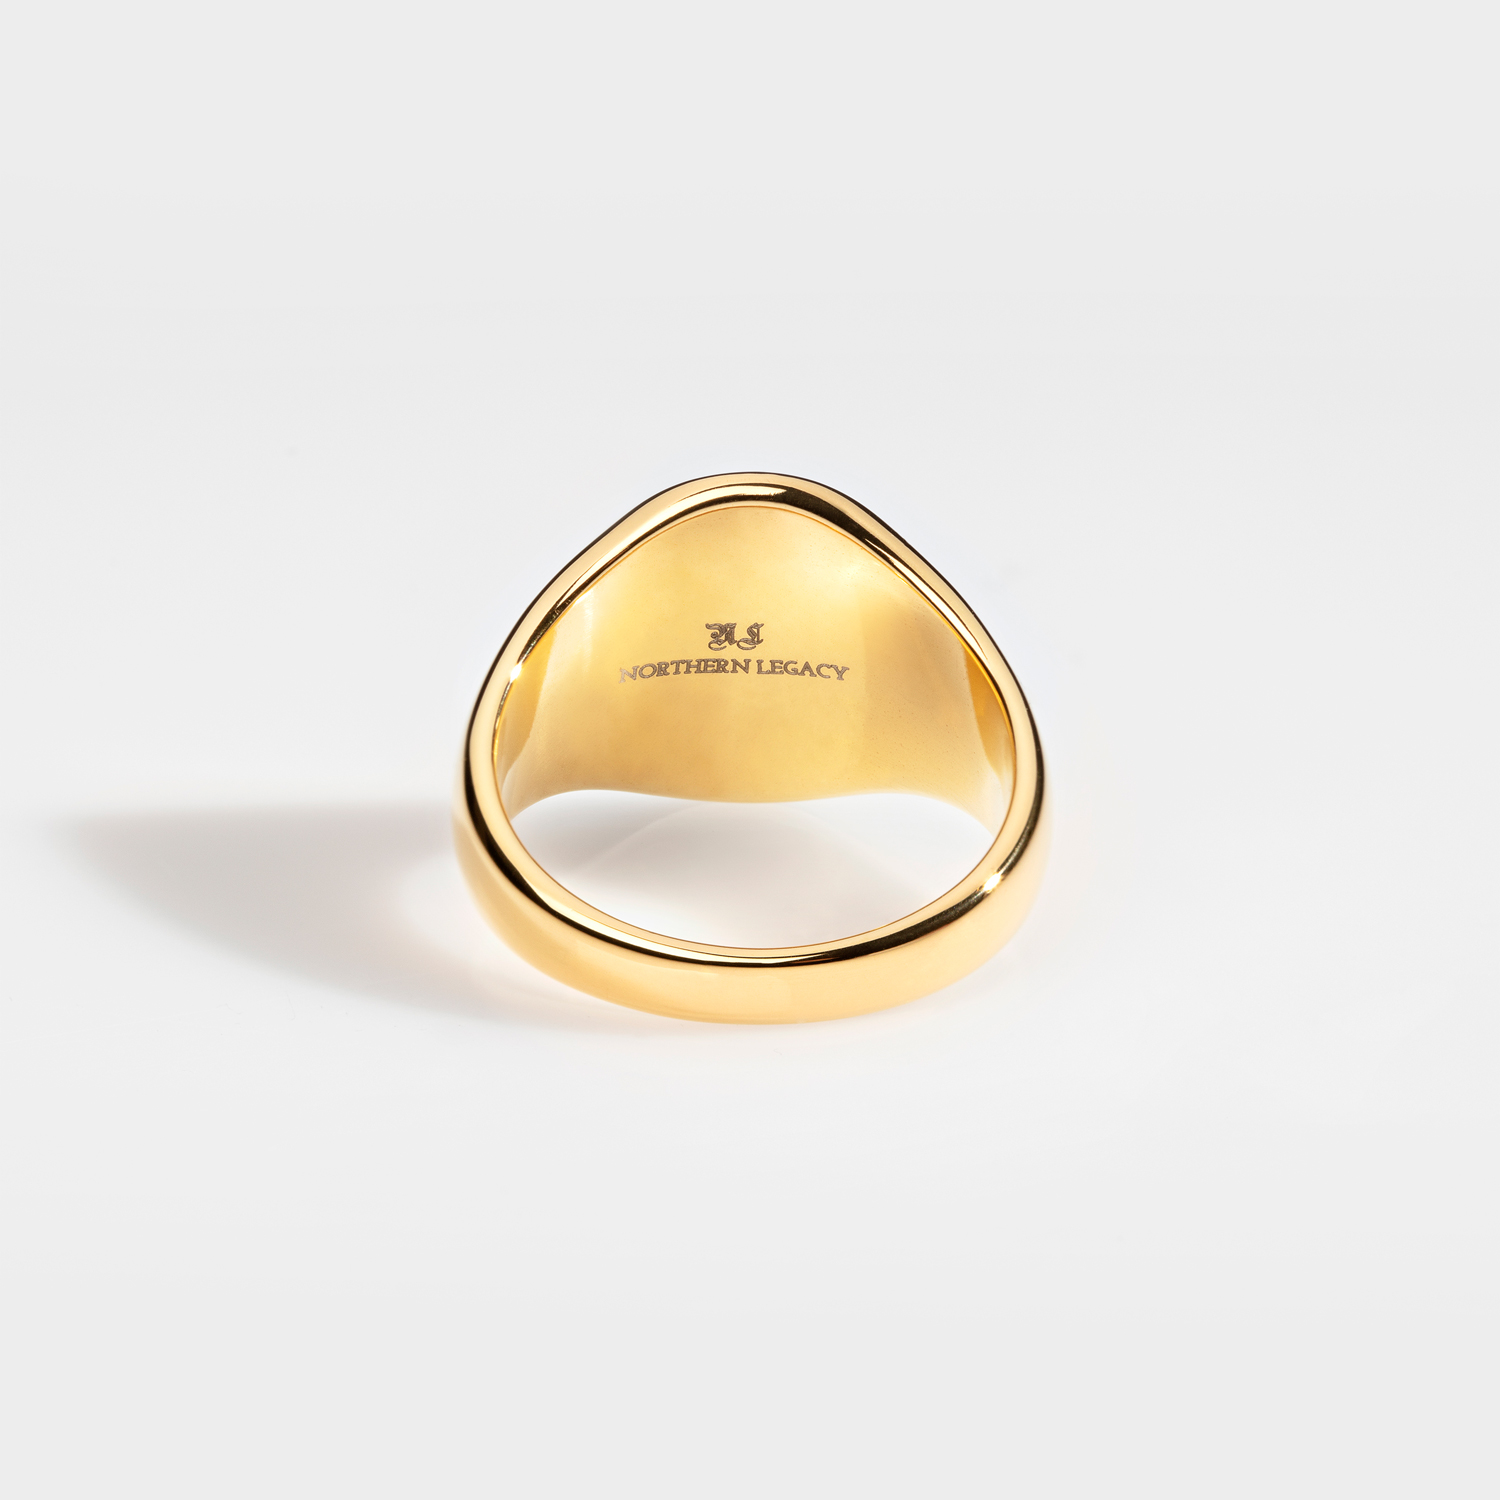 Classic Oval Signature - Gold tone Ring - Gold tone rings - Northern Legacy